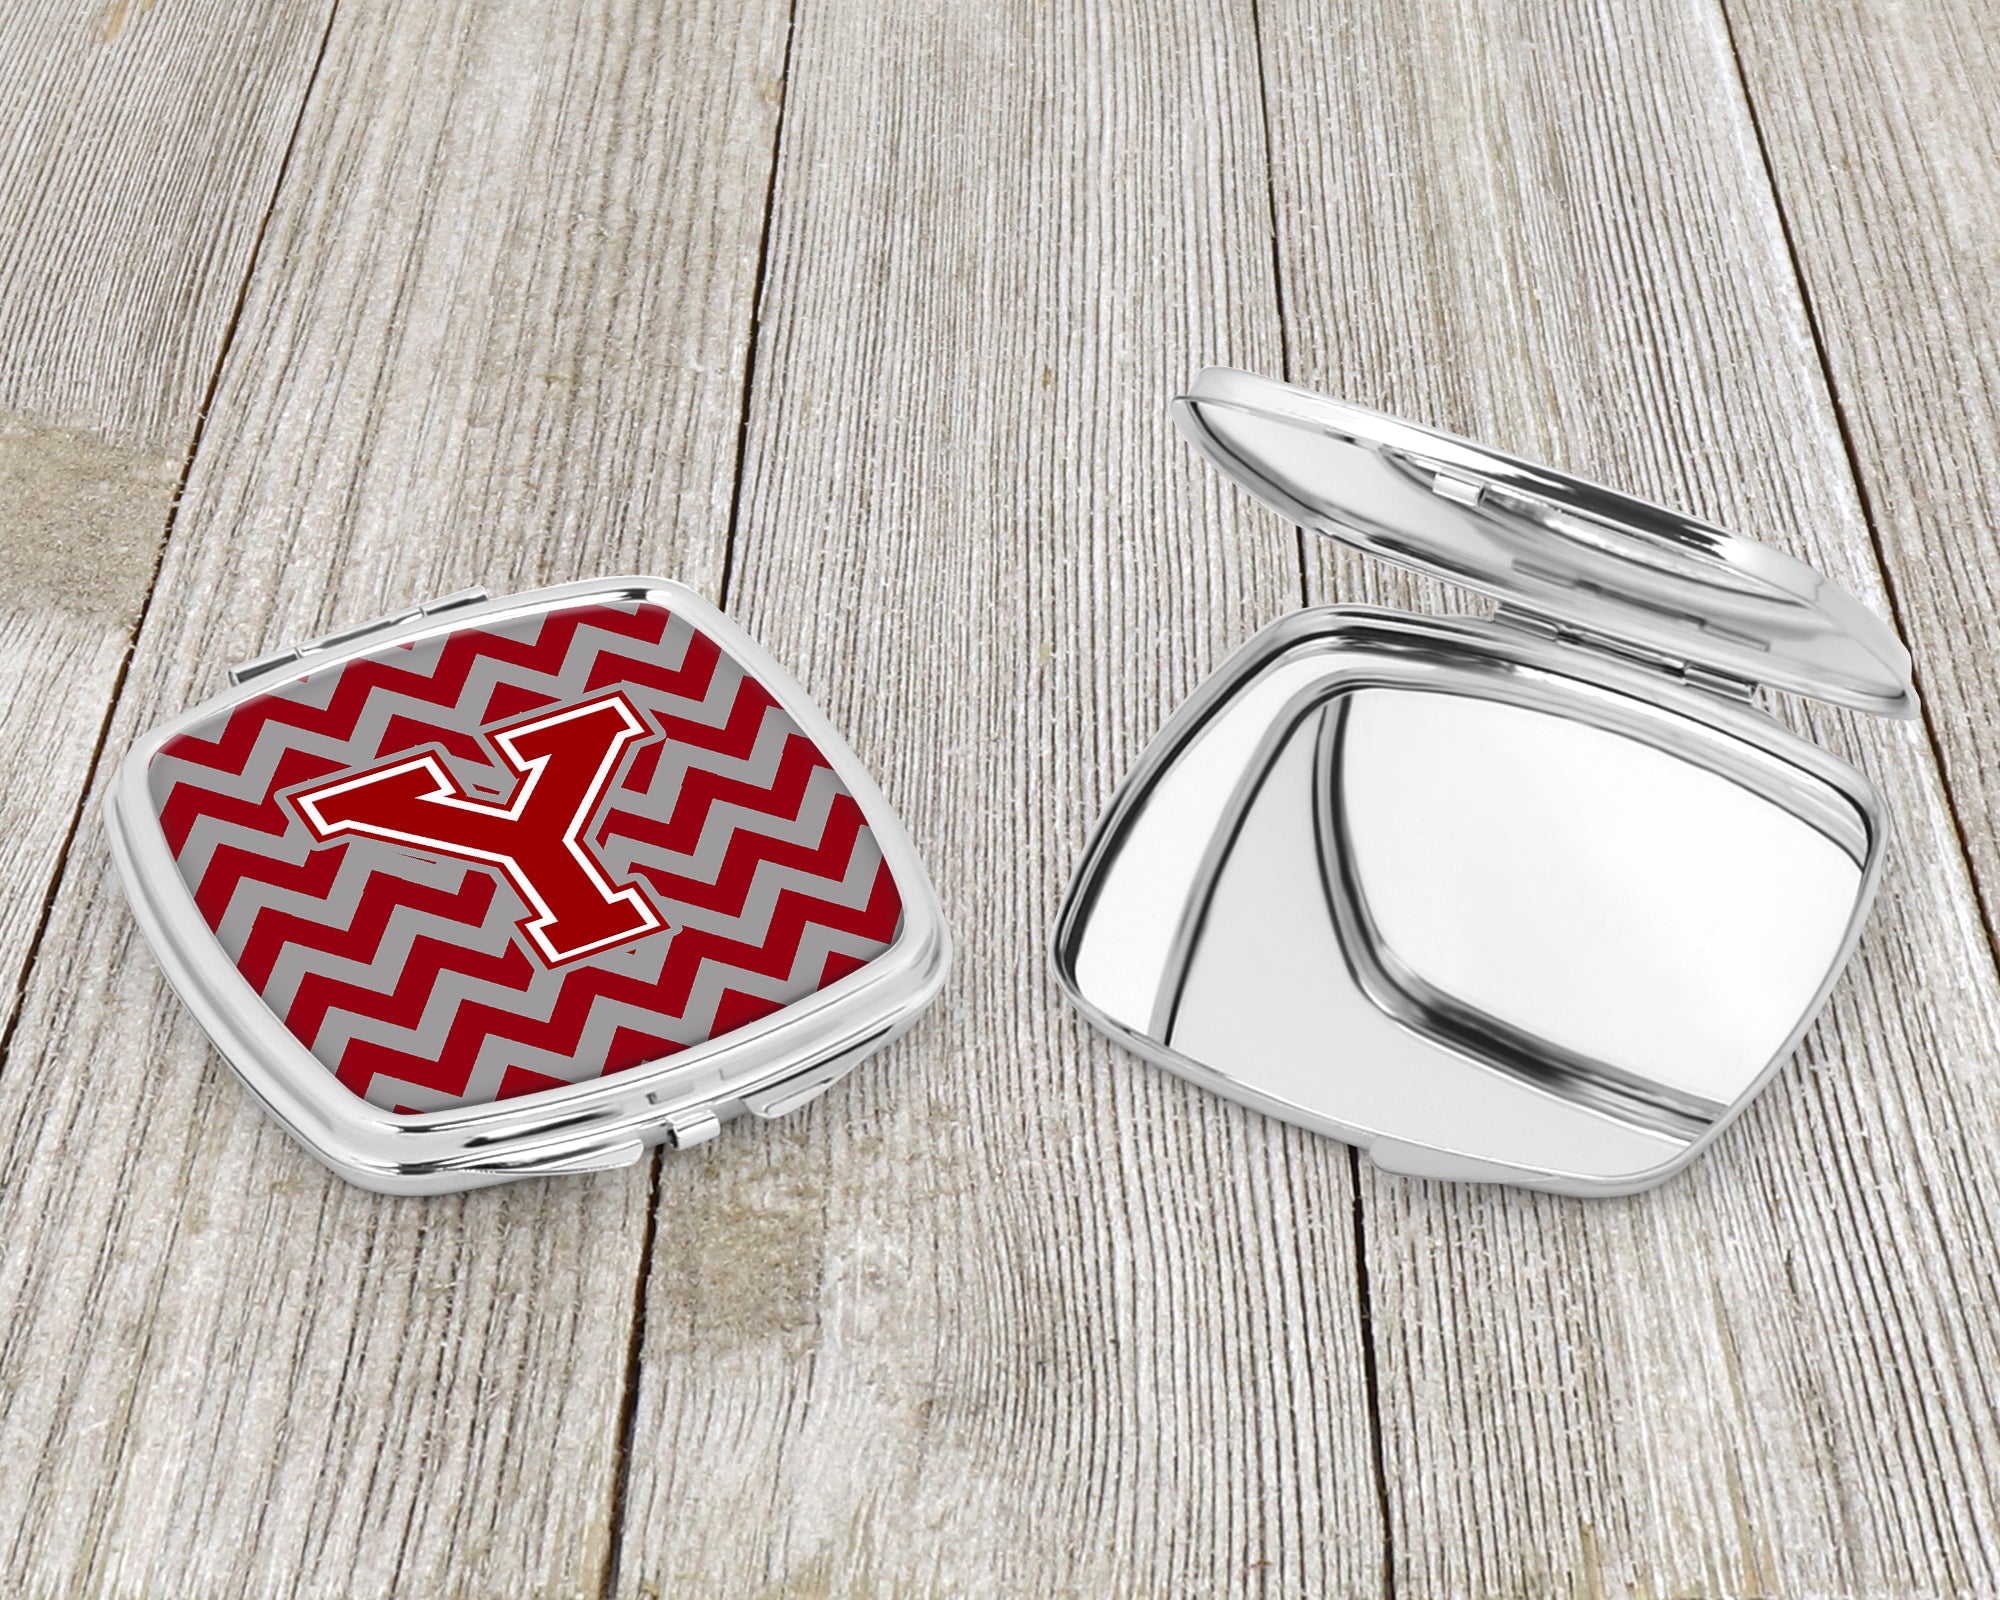 Letter Y Chevron Maroon and White Compact Mirror CJ1049-YSCM